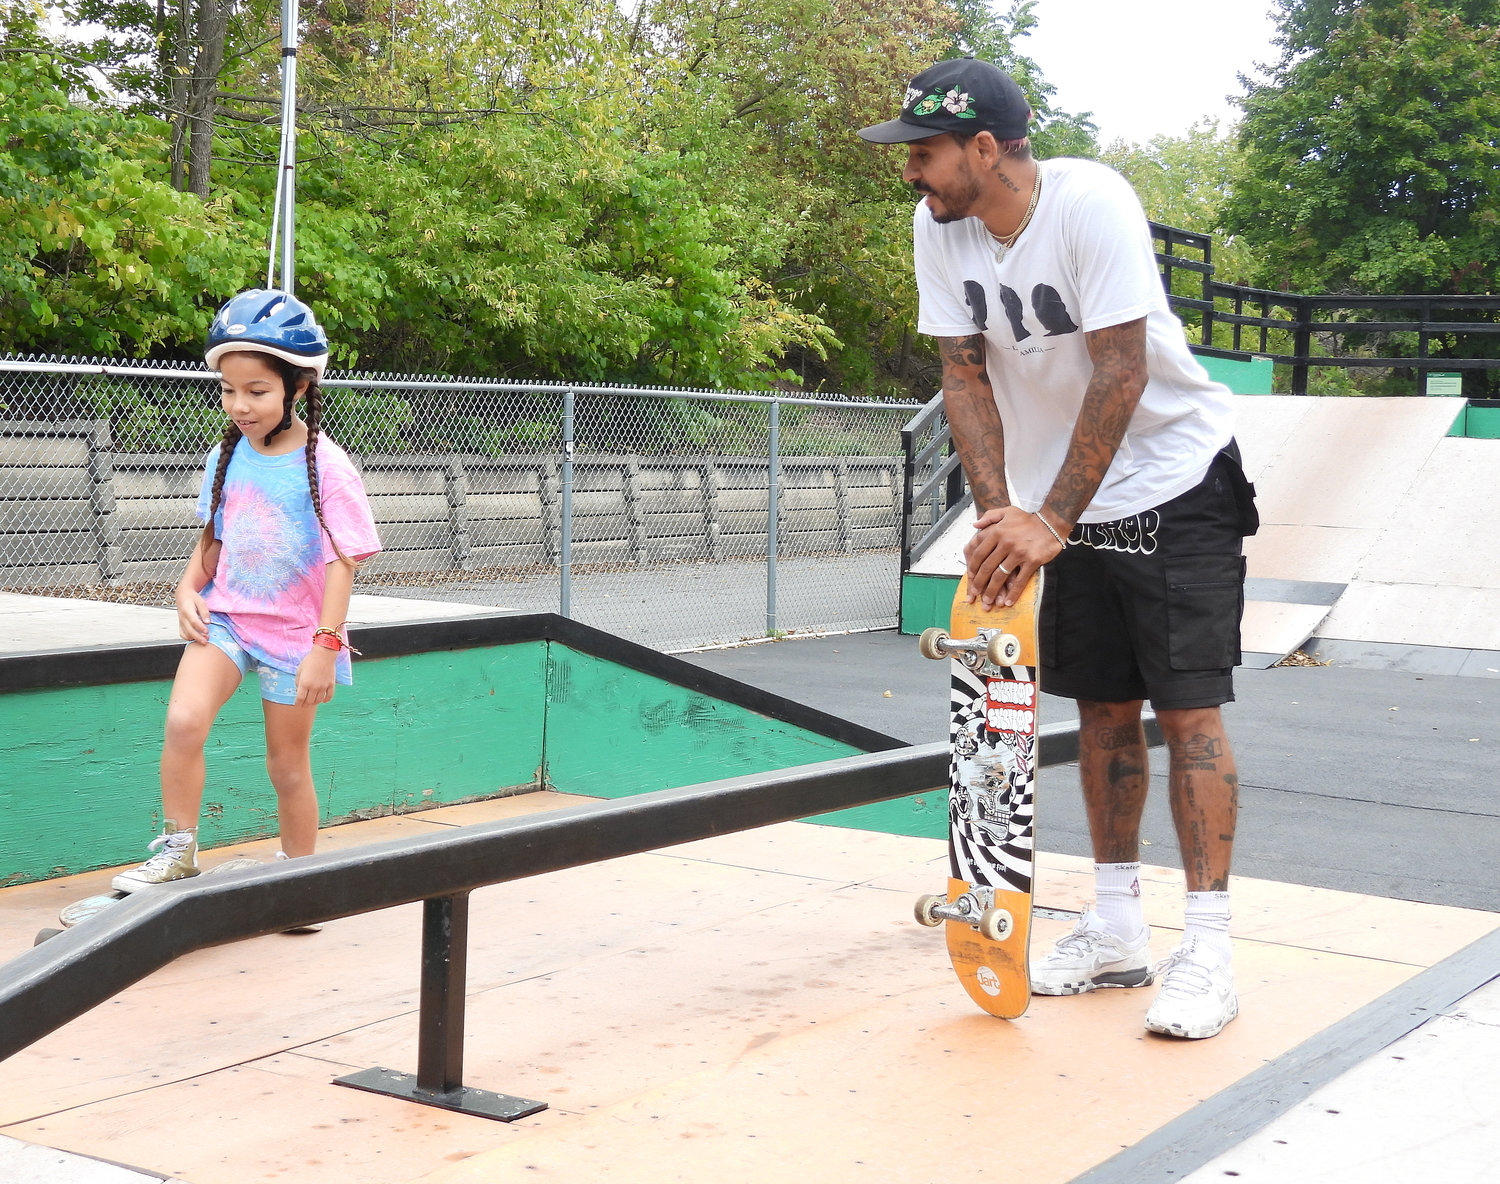 Emanuel "Manny" Santiago, Olympian and professional skateboarder, visited the Lenox Skatepark for a meet and greet, where he shredded the pipes and took time to give pointers and lessons to young children still learning their way around the board. Pictured here, Santiago instructs a young girl before she heads down the ramp, reminding her to shift her balance and to push off to get more speed before she goes up the next ramp